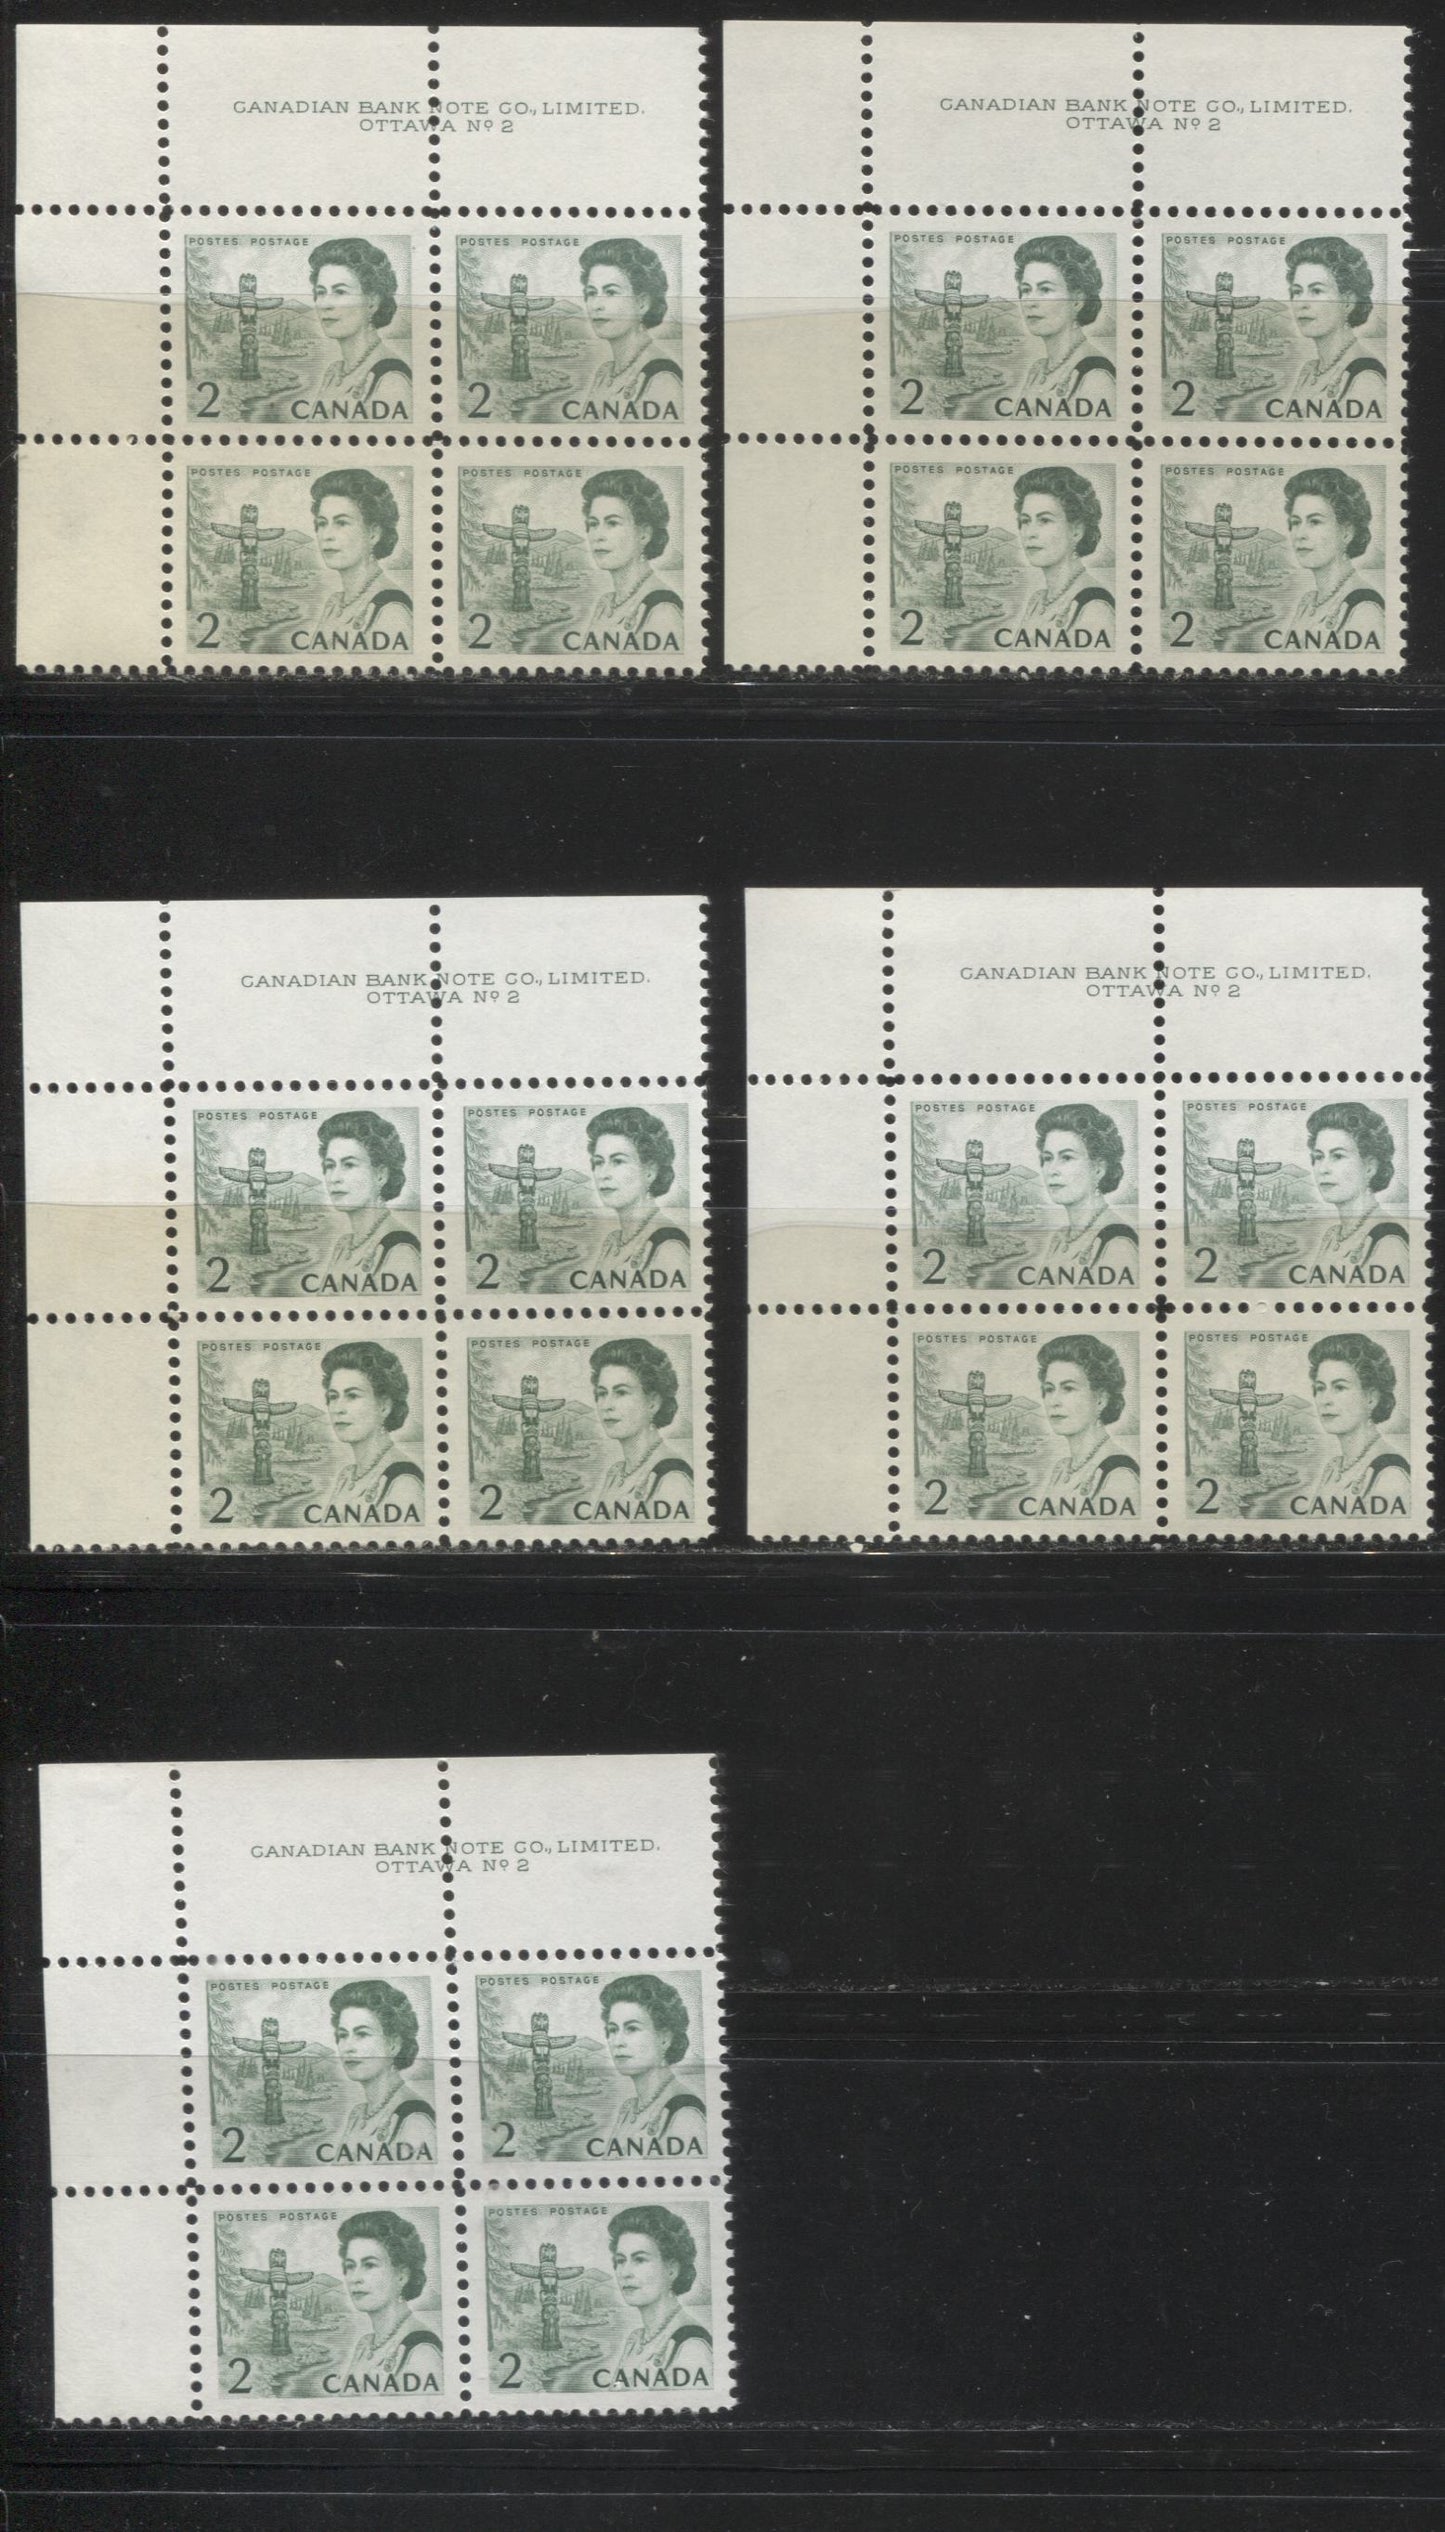 Lot #157 Canada #455, 455iv 2c Green & Deep Bright Green, Pacific Coast Totem Pole, 1967-1973 Centennial Issue, A Specialized Lot of Plate 2 UL Blocks on DF and NF Papers, All With Blinky Flaws From the Upper Left Pane